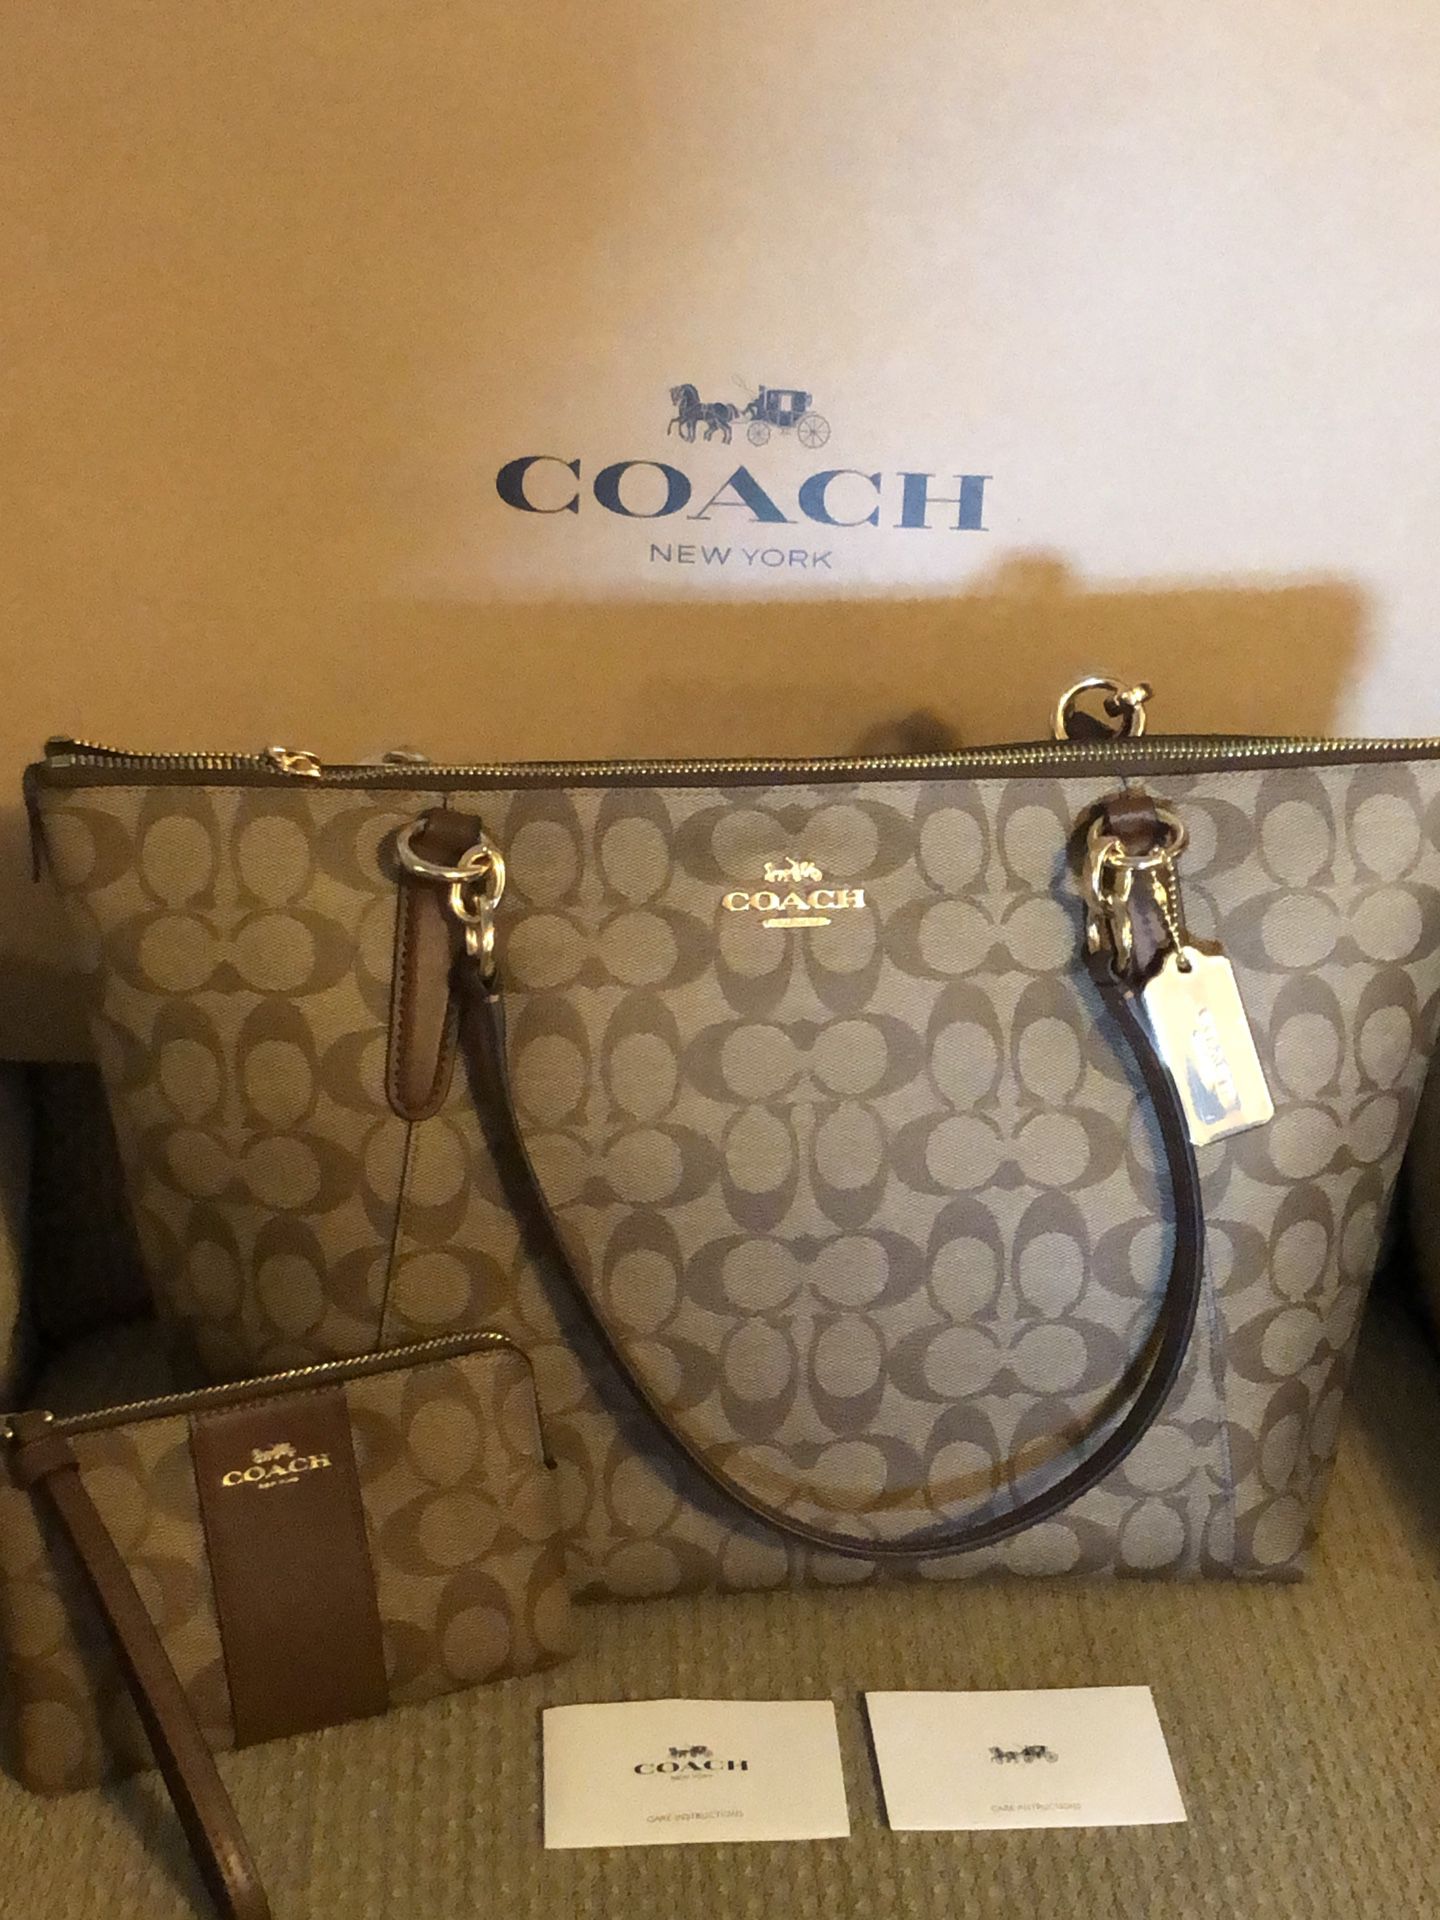 Brand New Authentic Coach handbag with tags